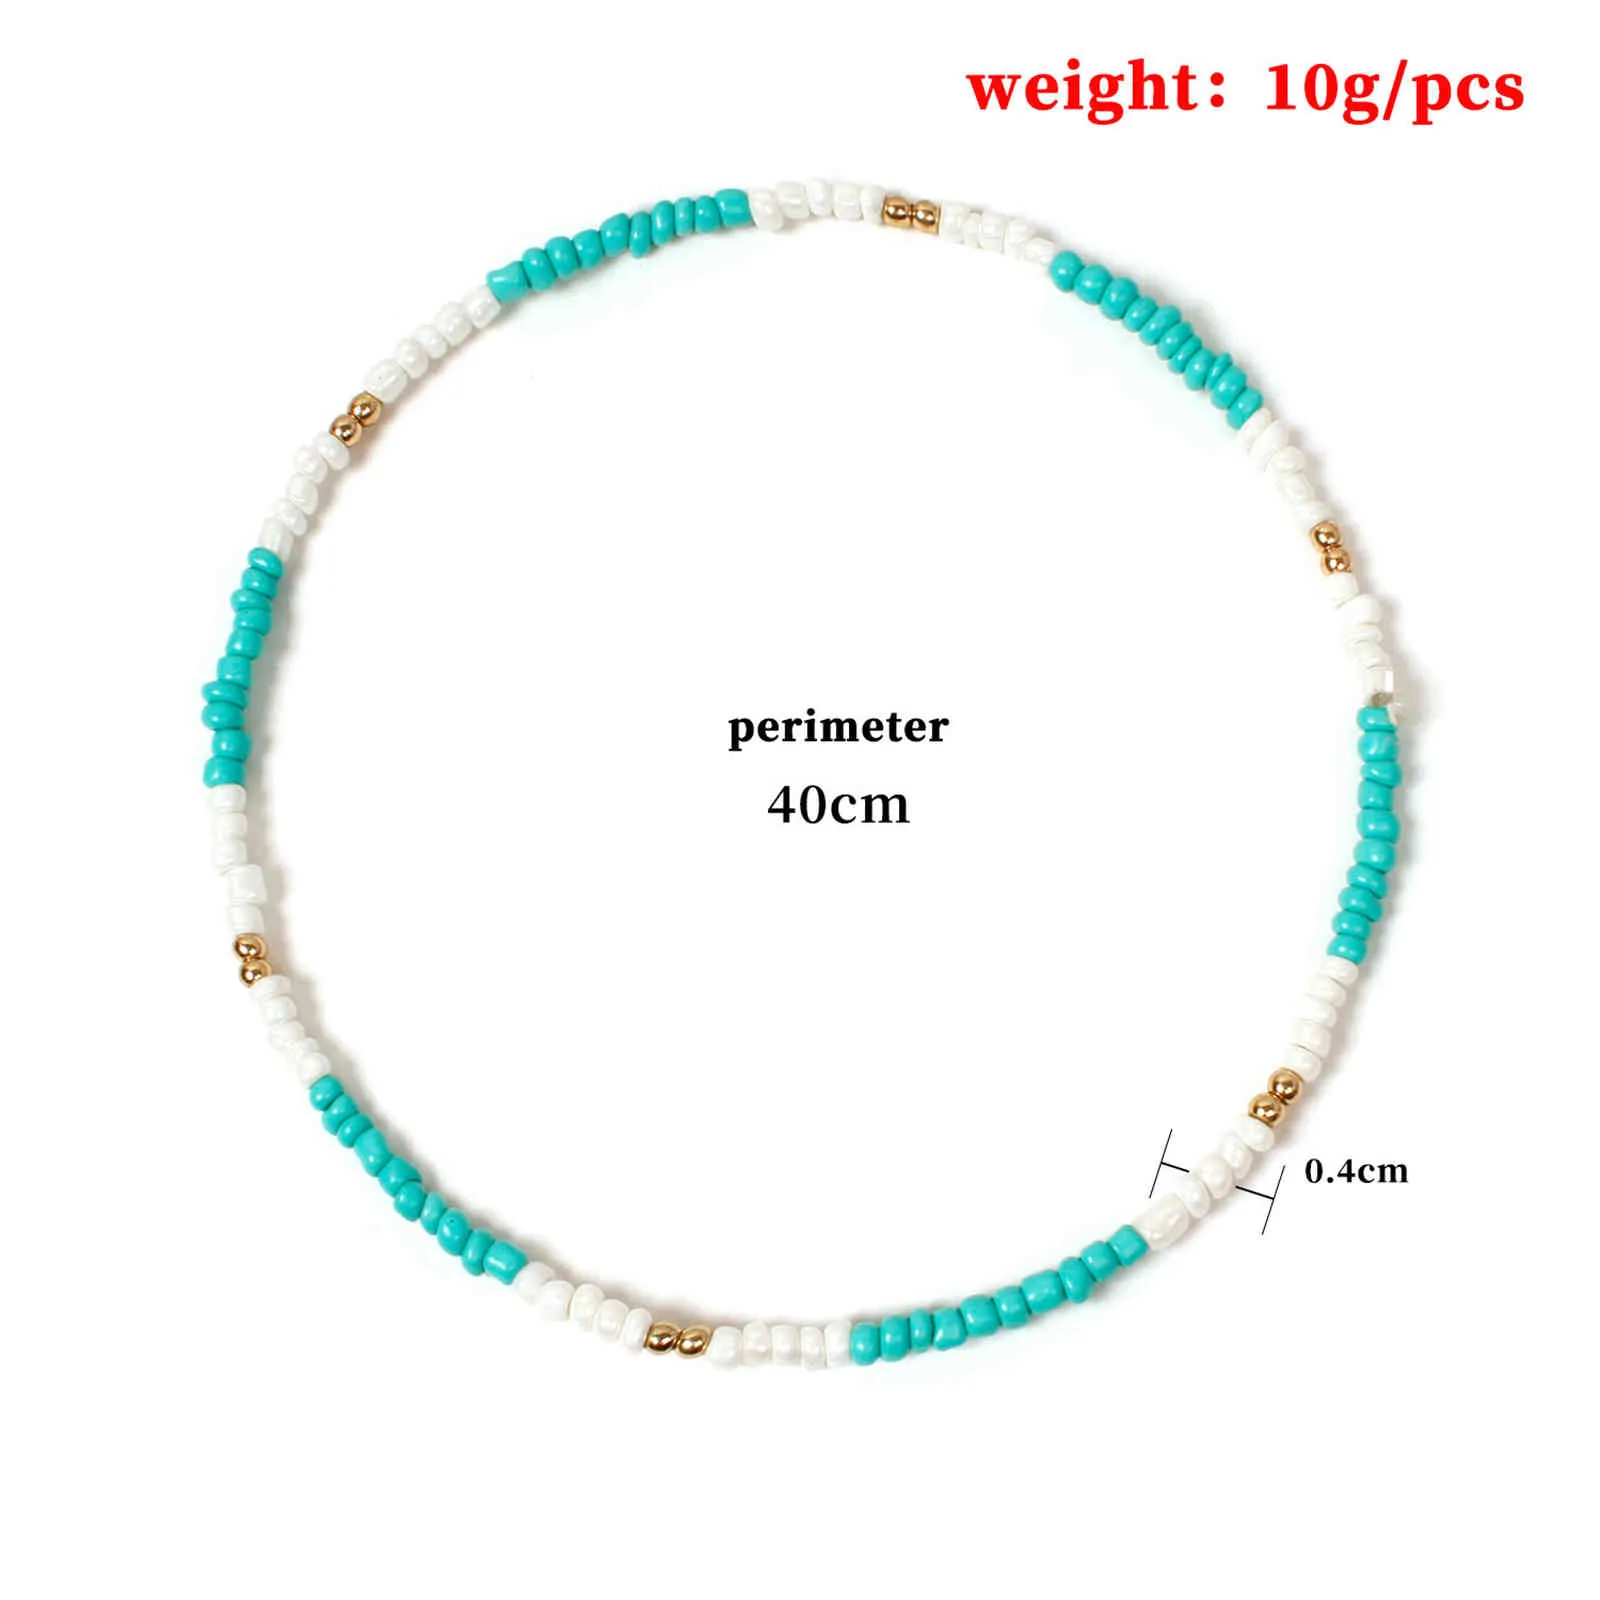 Bohemia Style Small Glass Beaded Necklace Multicolor Short Chokers Charm Necklaces Sweet Neck Jewelry For Women Girls 40cm Long